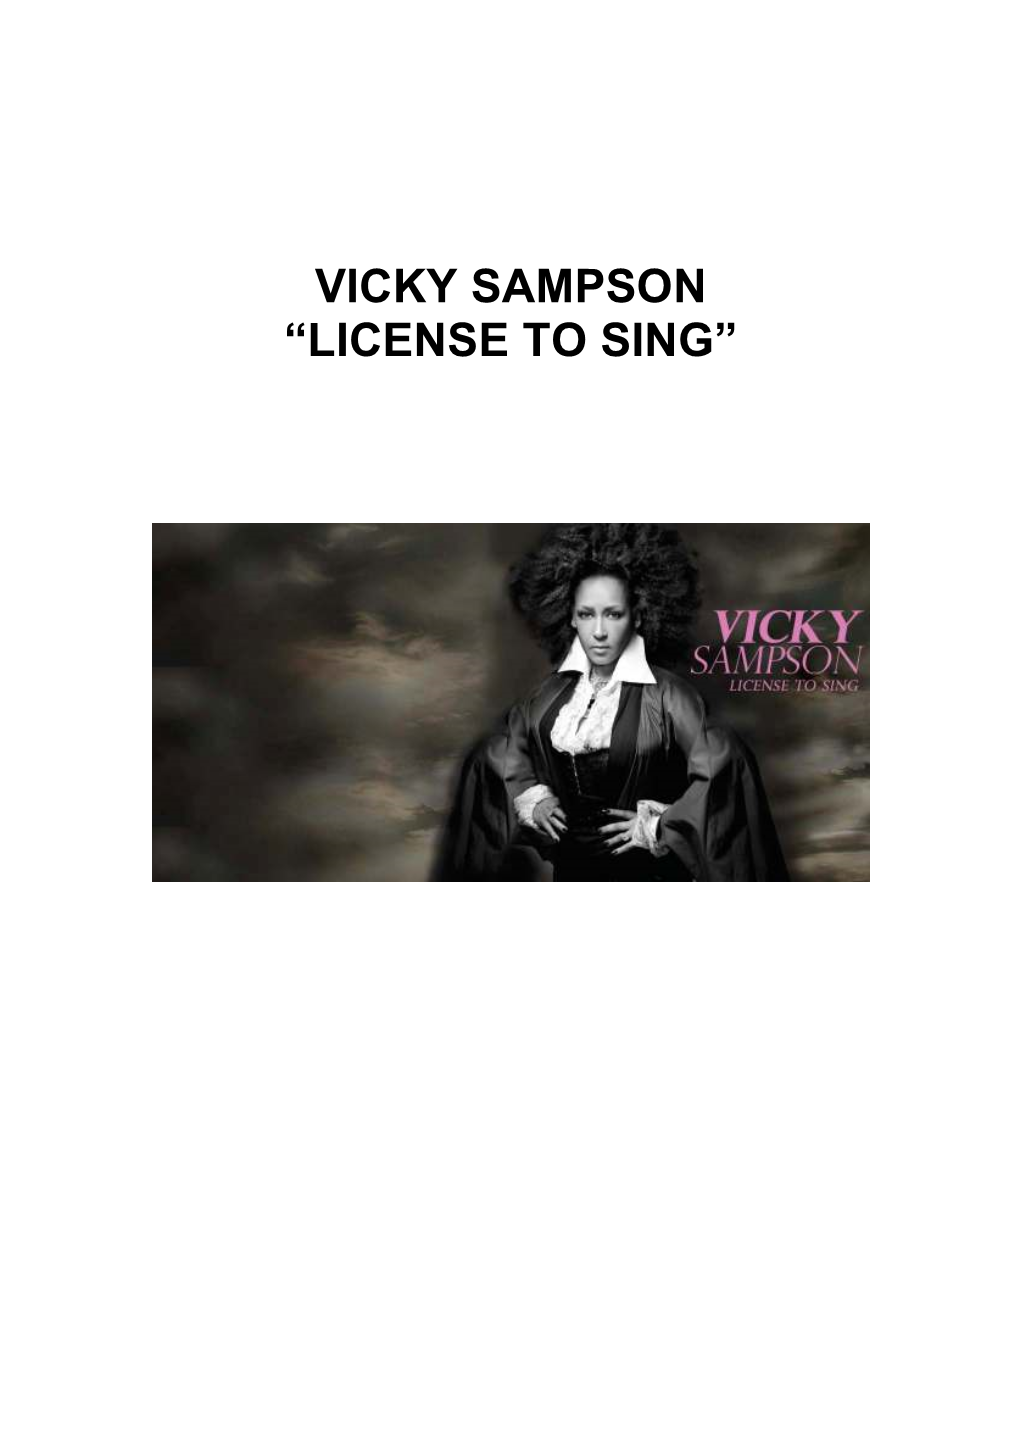 Vicky Sampson “License to Sing”